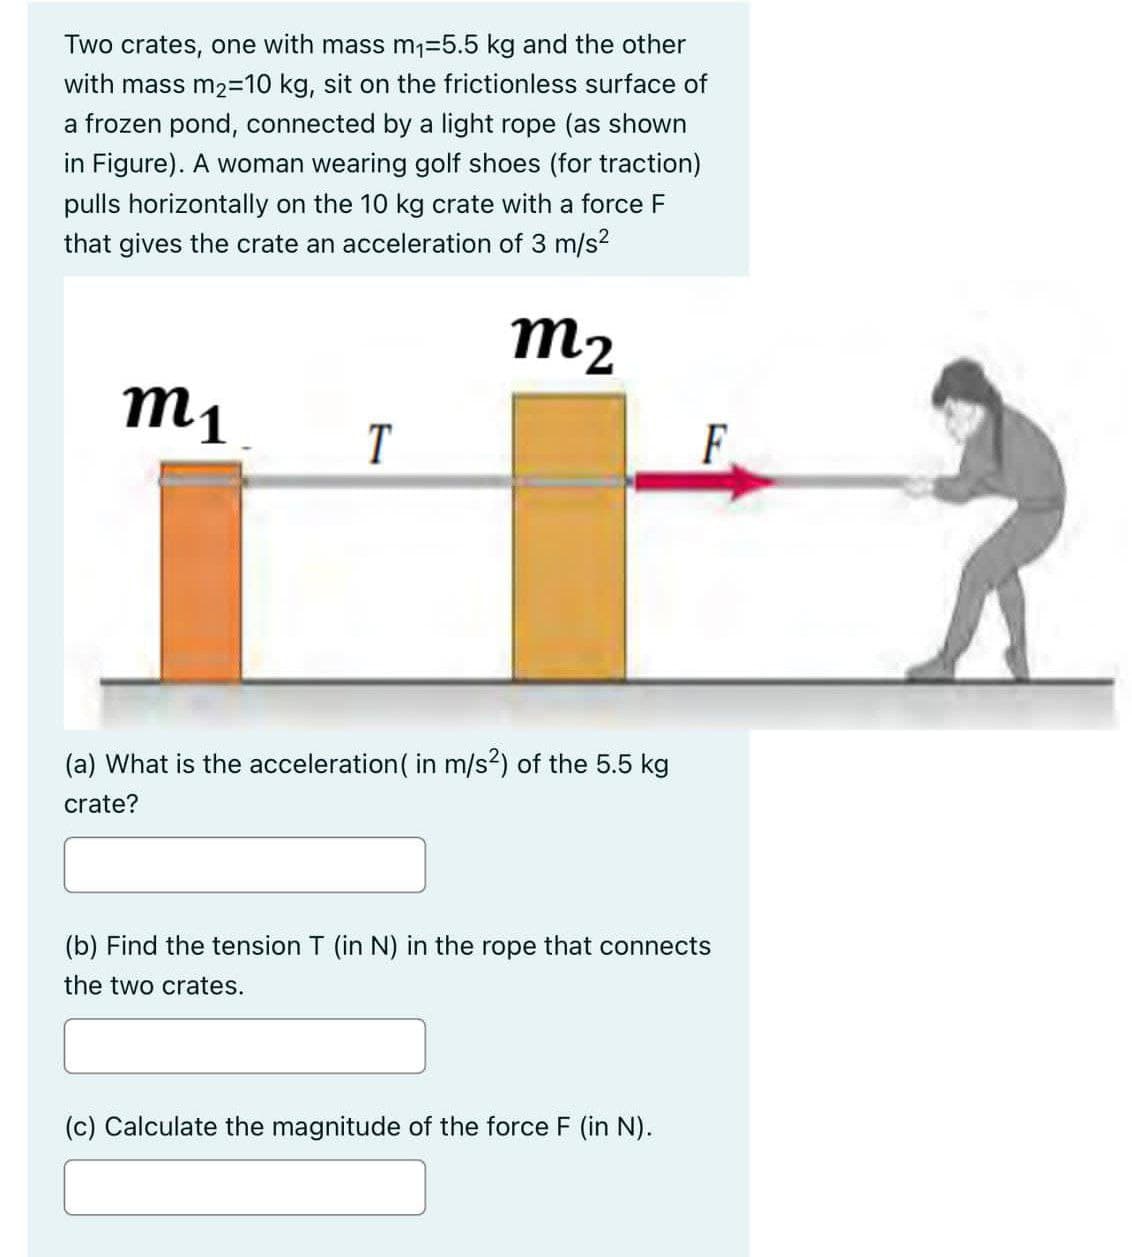 Two crates, one with mass m₁=5.5 kg and the other
with mass m2=10 kg, sit on the frictionless surface of
a frozen pond, connected by a light rope (as shown
in Figure). A woman wearing golf shoes (for traction)
pulls horizontally on the 10 kg crate with a force F
that gives the crate an acceleration of 3 m/s²
m₂
m₁
T
(a) What is the acceleration ( in m/s²) of the 5.5 kg
crate?
F
(b) Find the tension T (in N) in the rope that connects
the two crates.
(c) Calculate the magnitude of the force F (in N).